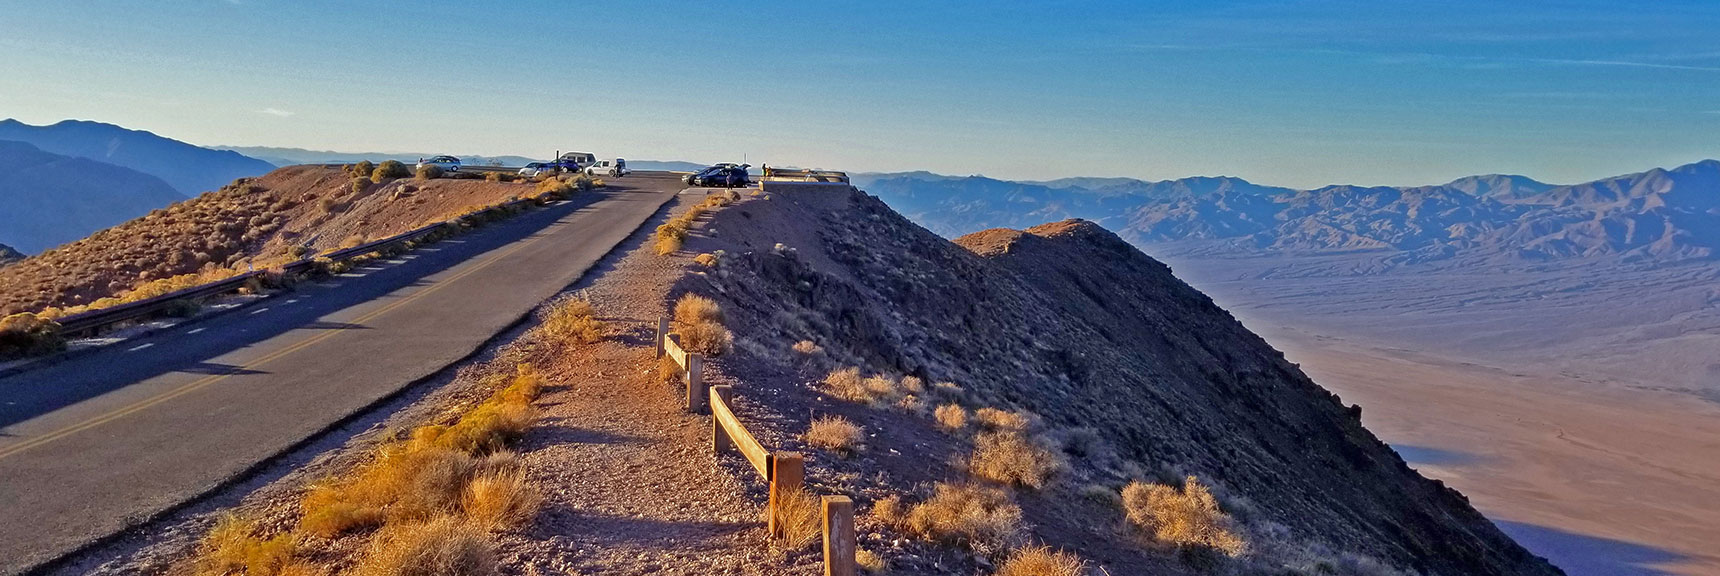 Trailhead Beginning at Dante's View | Dante's View to Mt. Perry | Death Valley National Park, CA